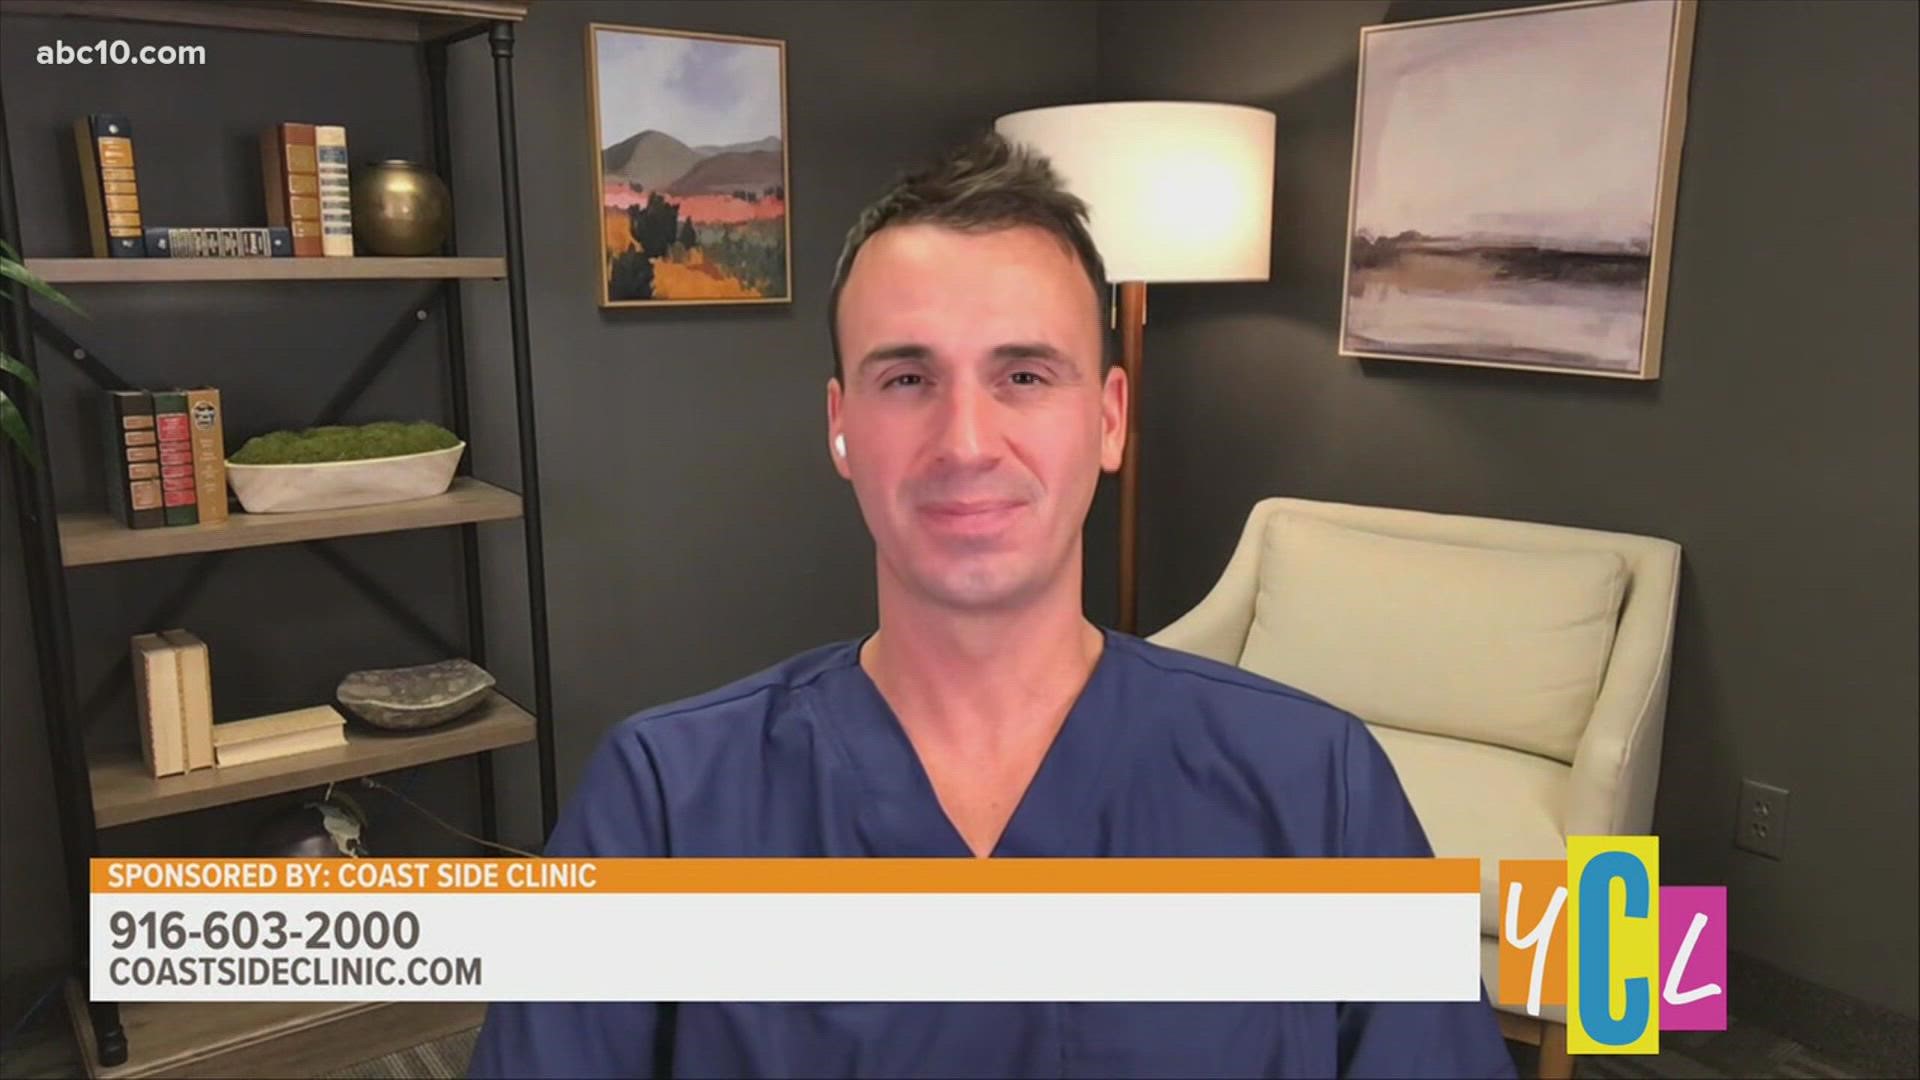 Dealing with erectile dysfunction doesn't have to be forever. Learn more about a new breakthrough treatment for ED. This segment paid for by Coast Side Clinic.